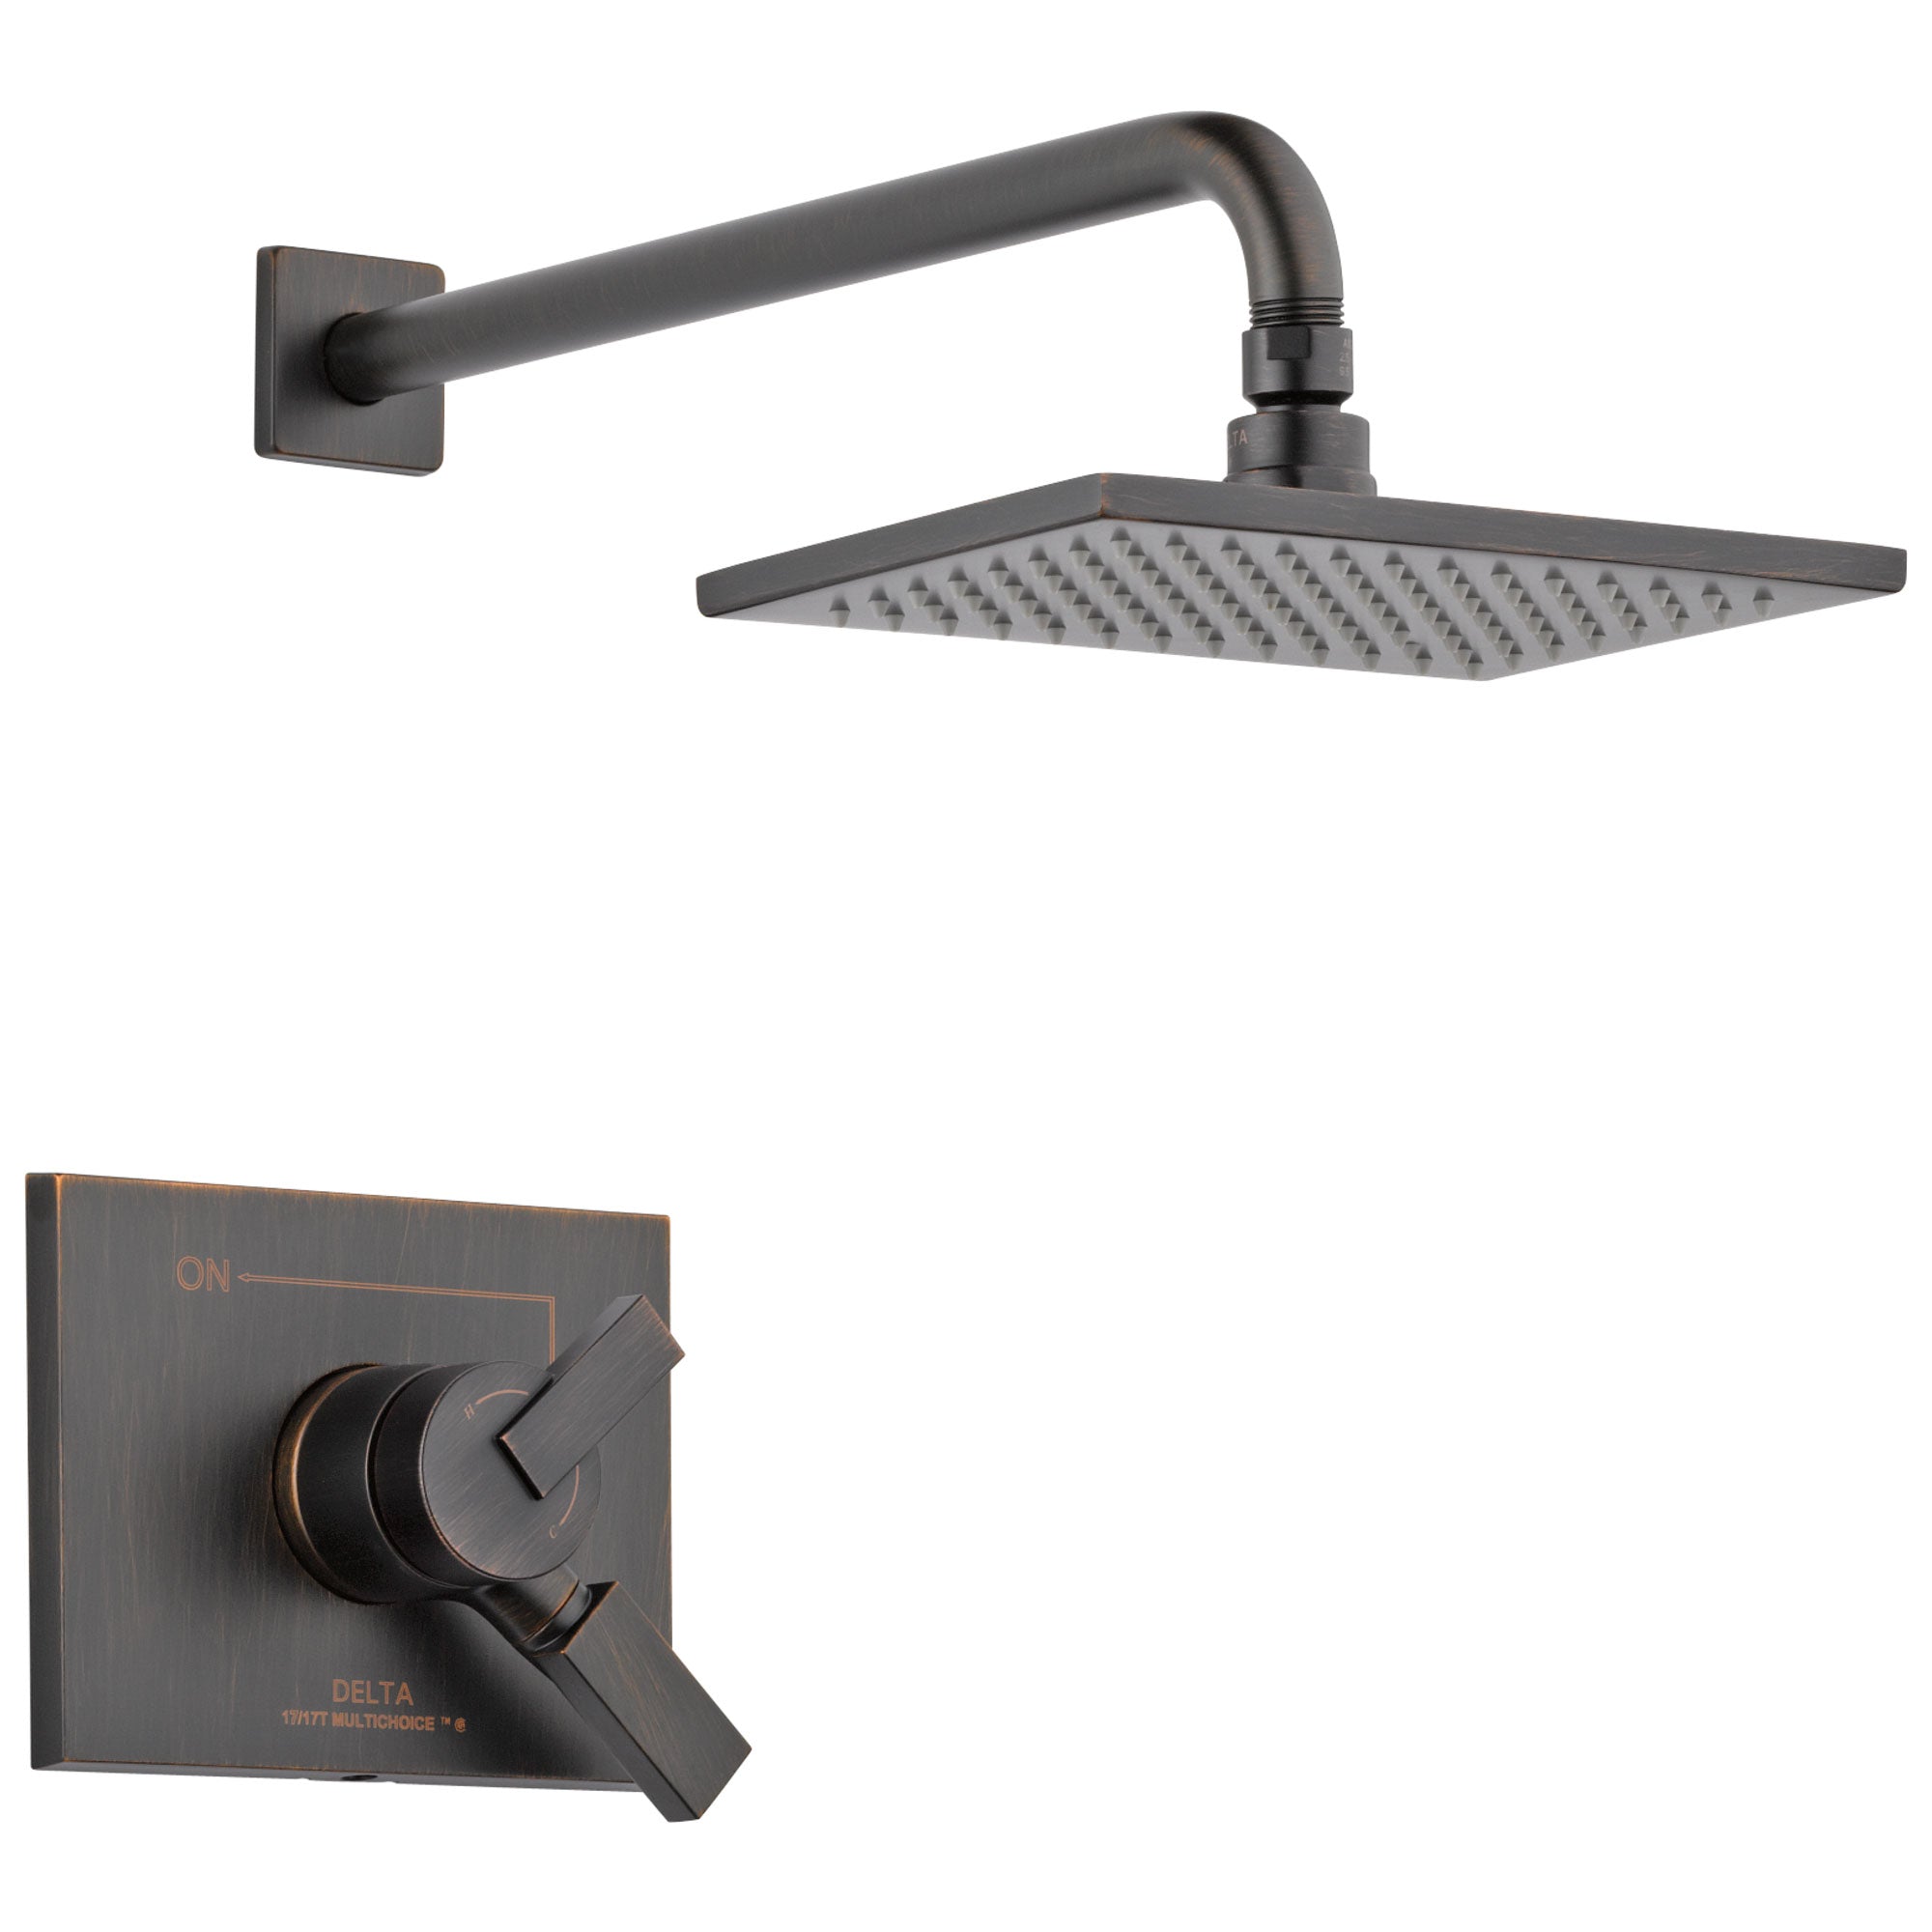 Delta Vero Venetian Bronze Finish Monitor 17 Series Water Efficient Shower only Faucet Includes Handles, Cartridge, and Valve without Stops D3381V